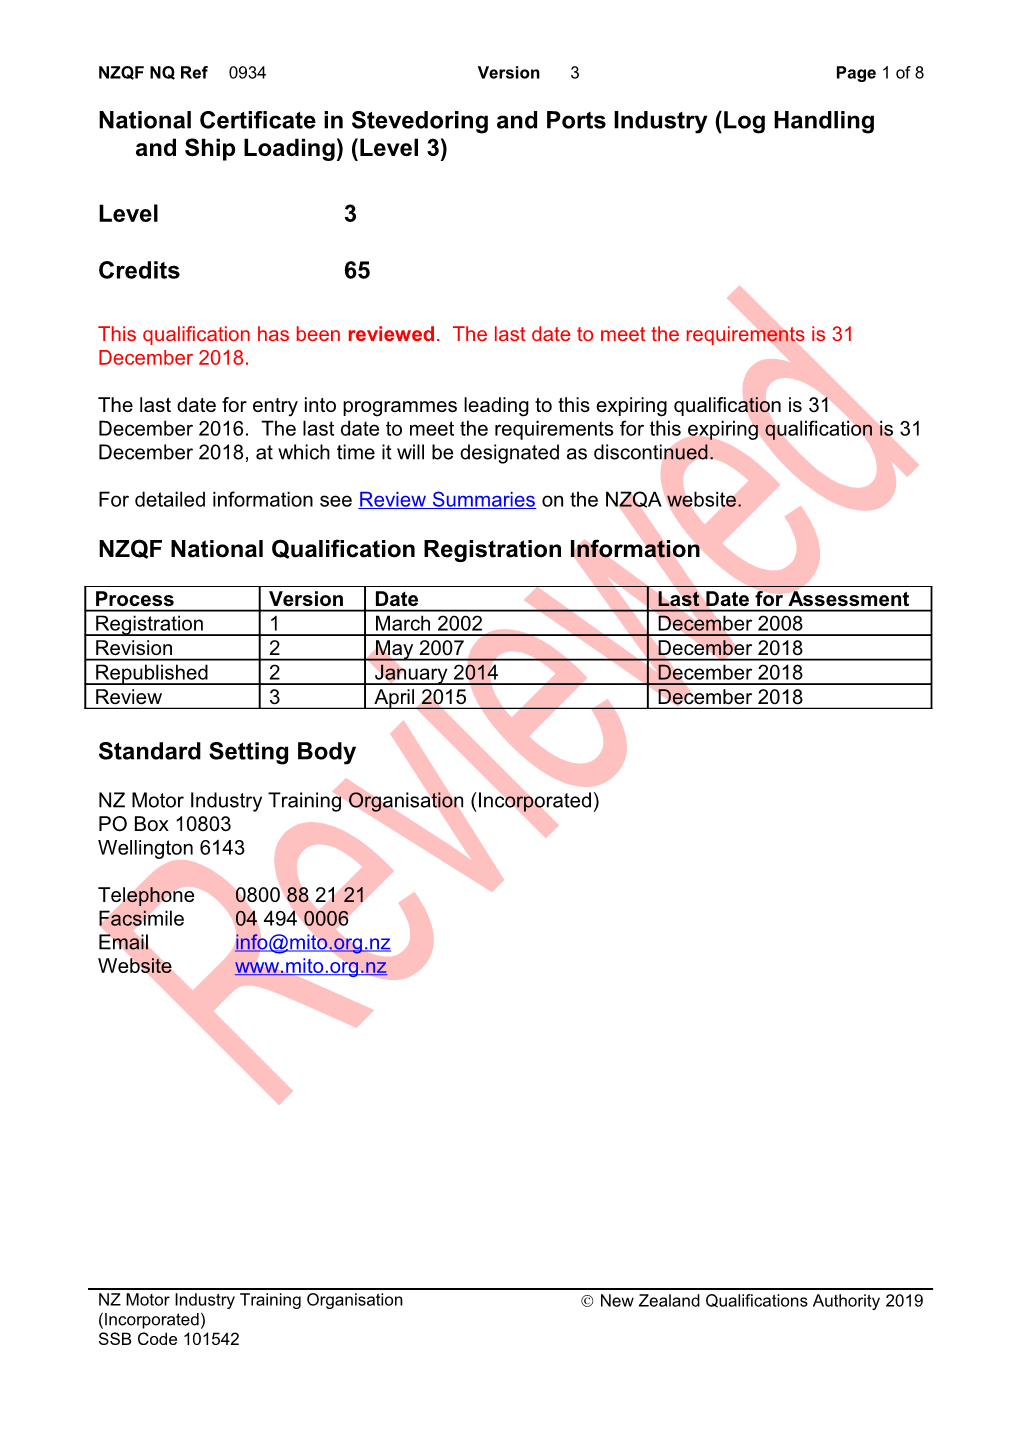 0934 National Certificate in Stevedoring and Ports Industry (Log Handling and Ship Loading)